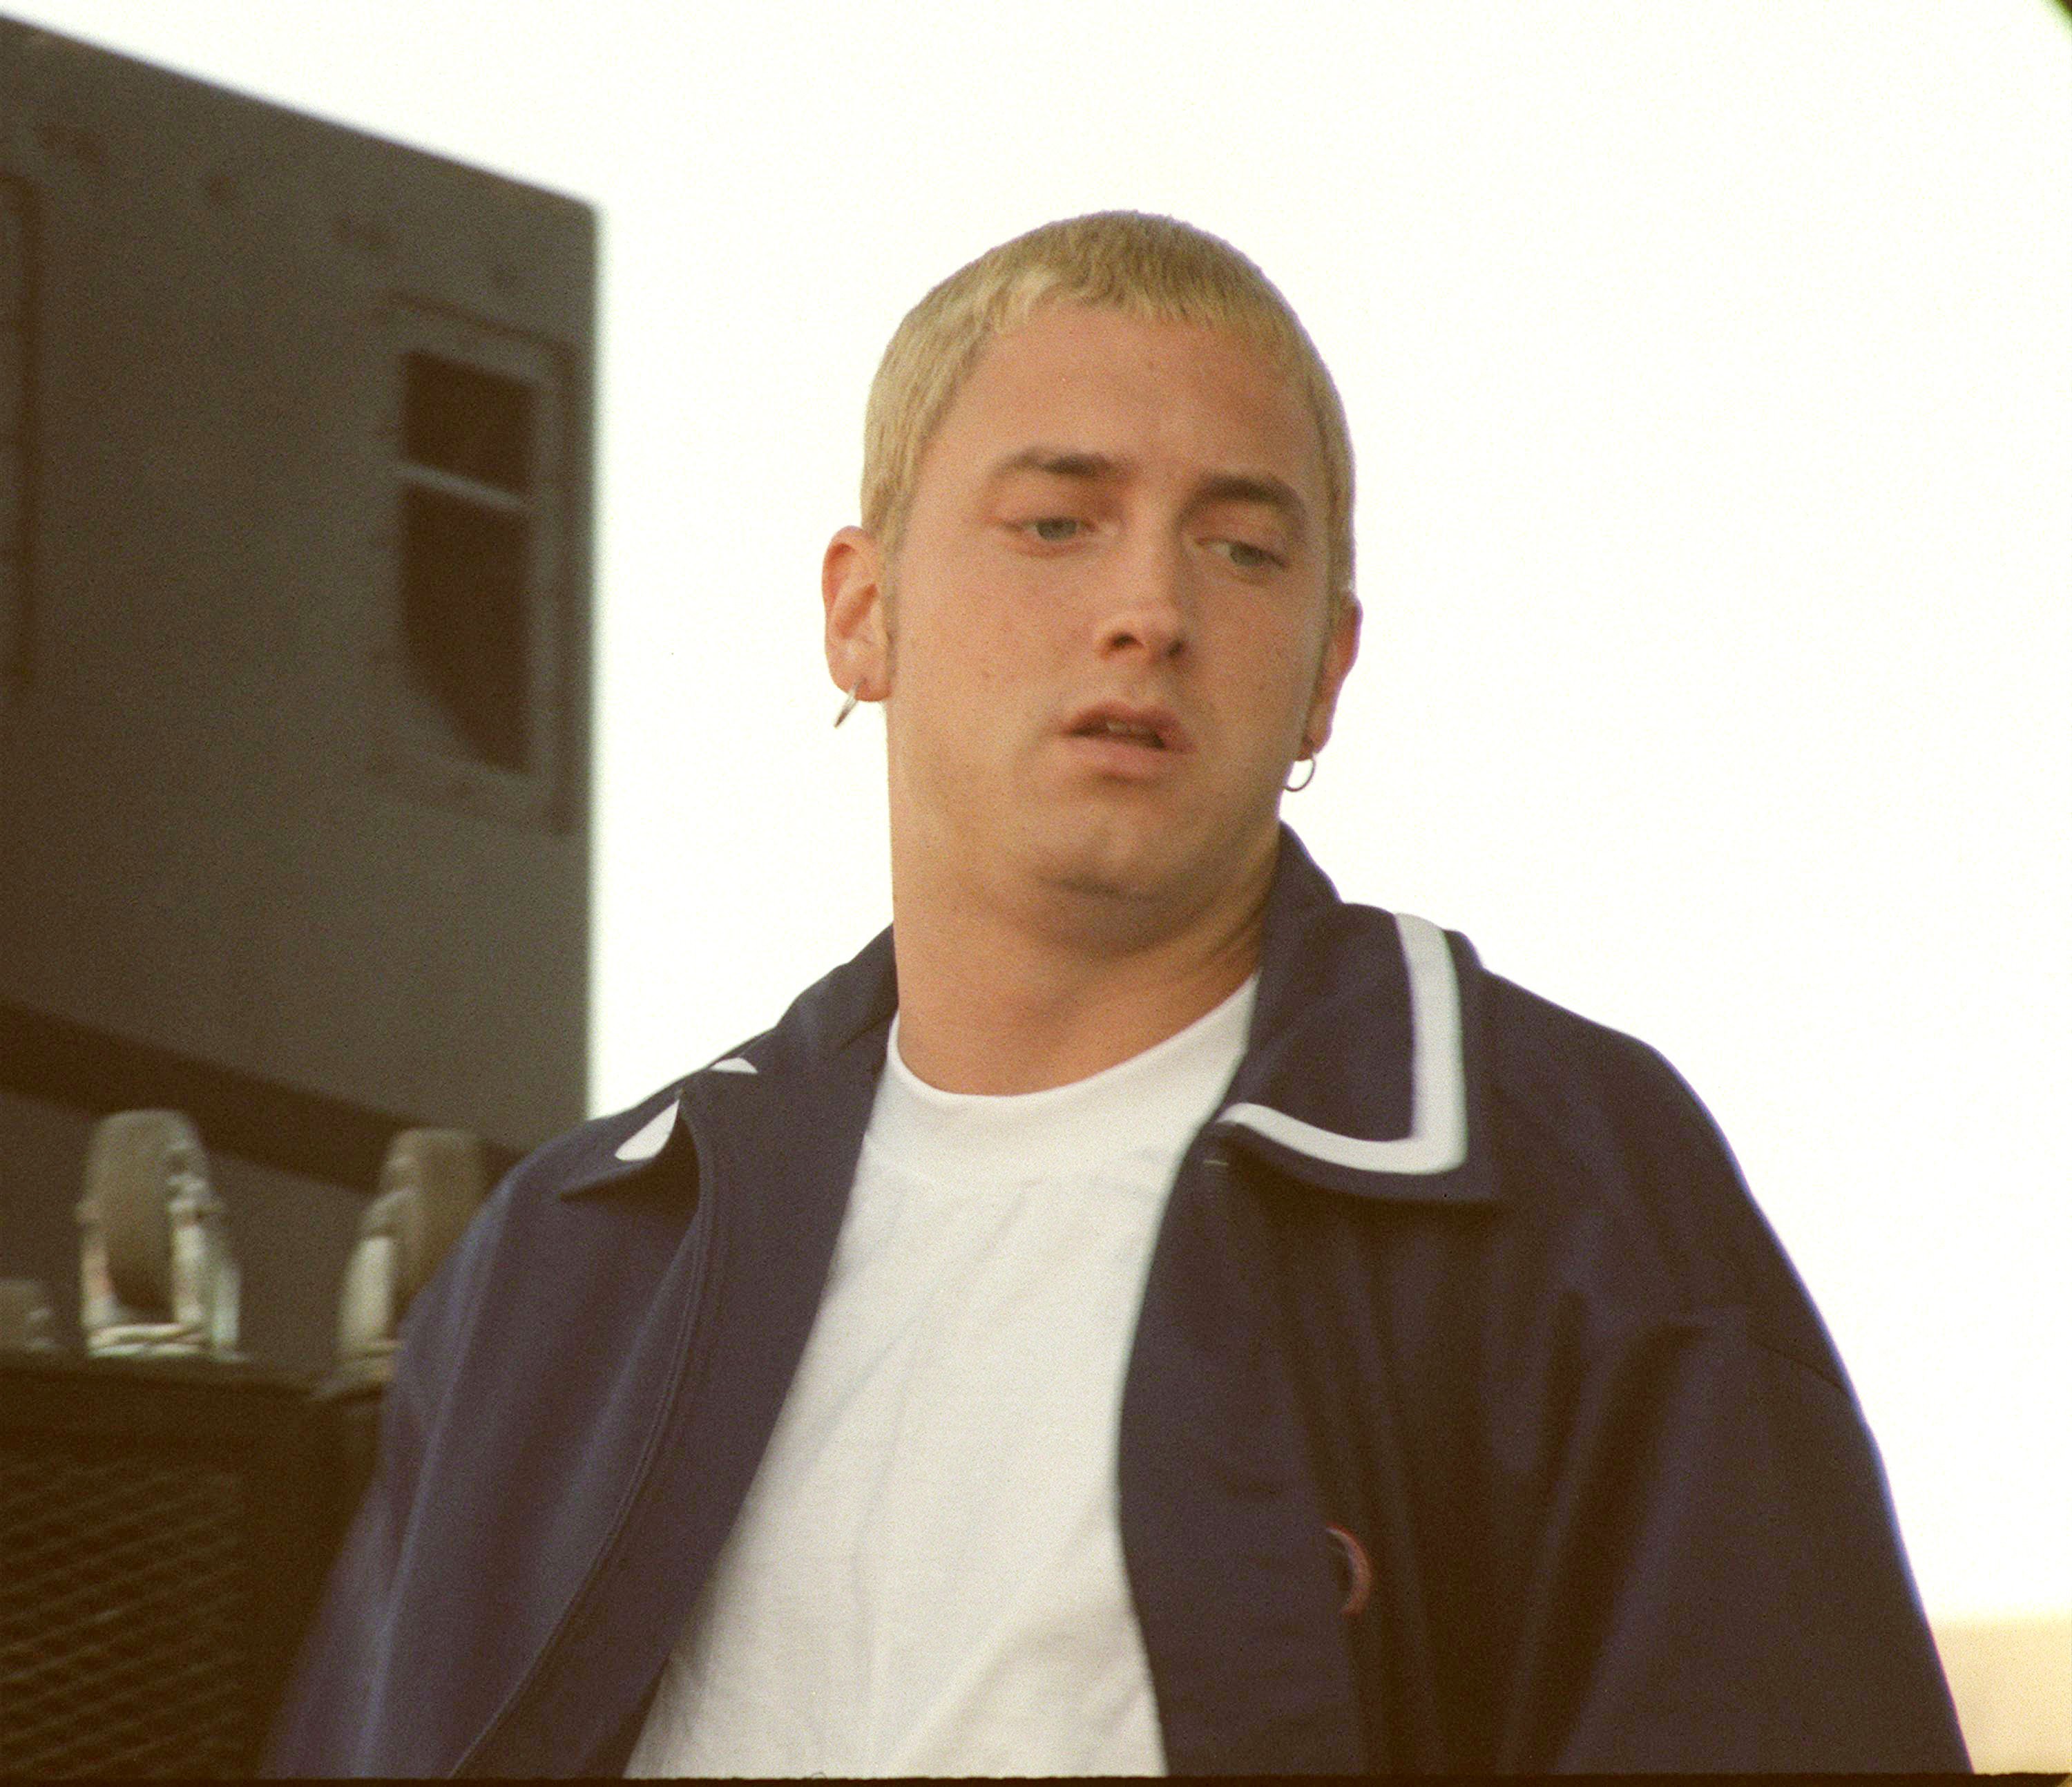  Eminem pictured as he performed on July 3, 1999 in Oakland | Source: Getty Images